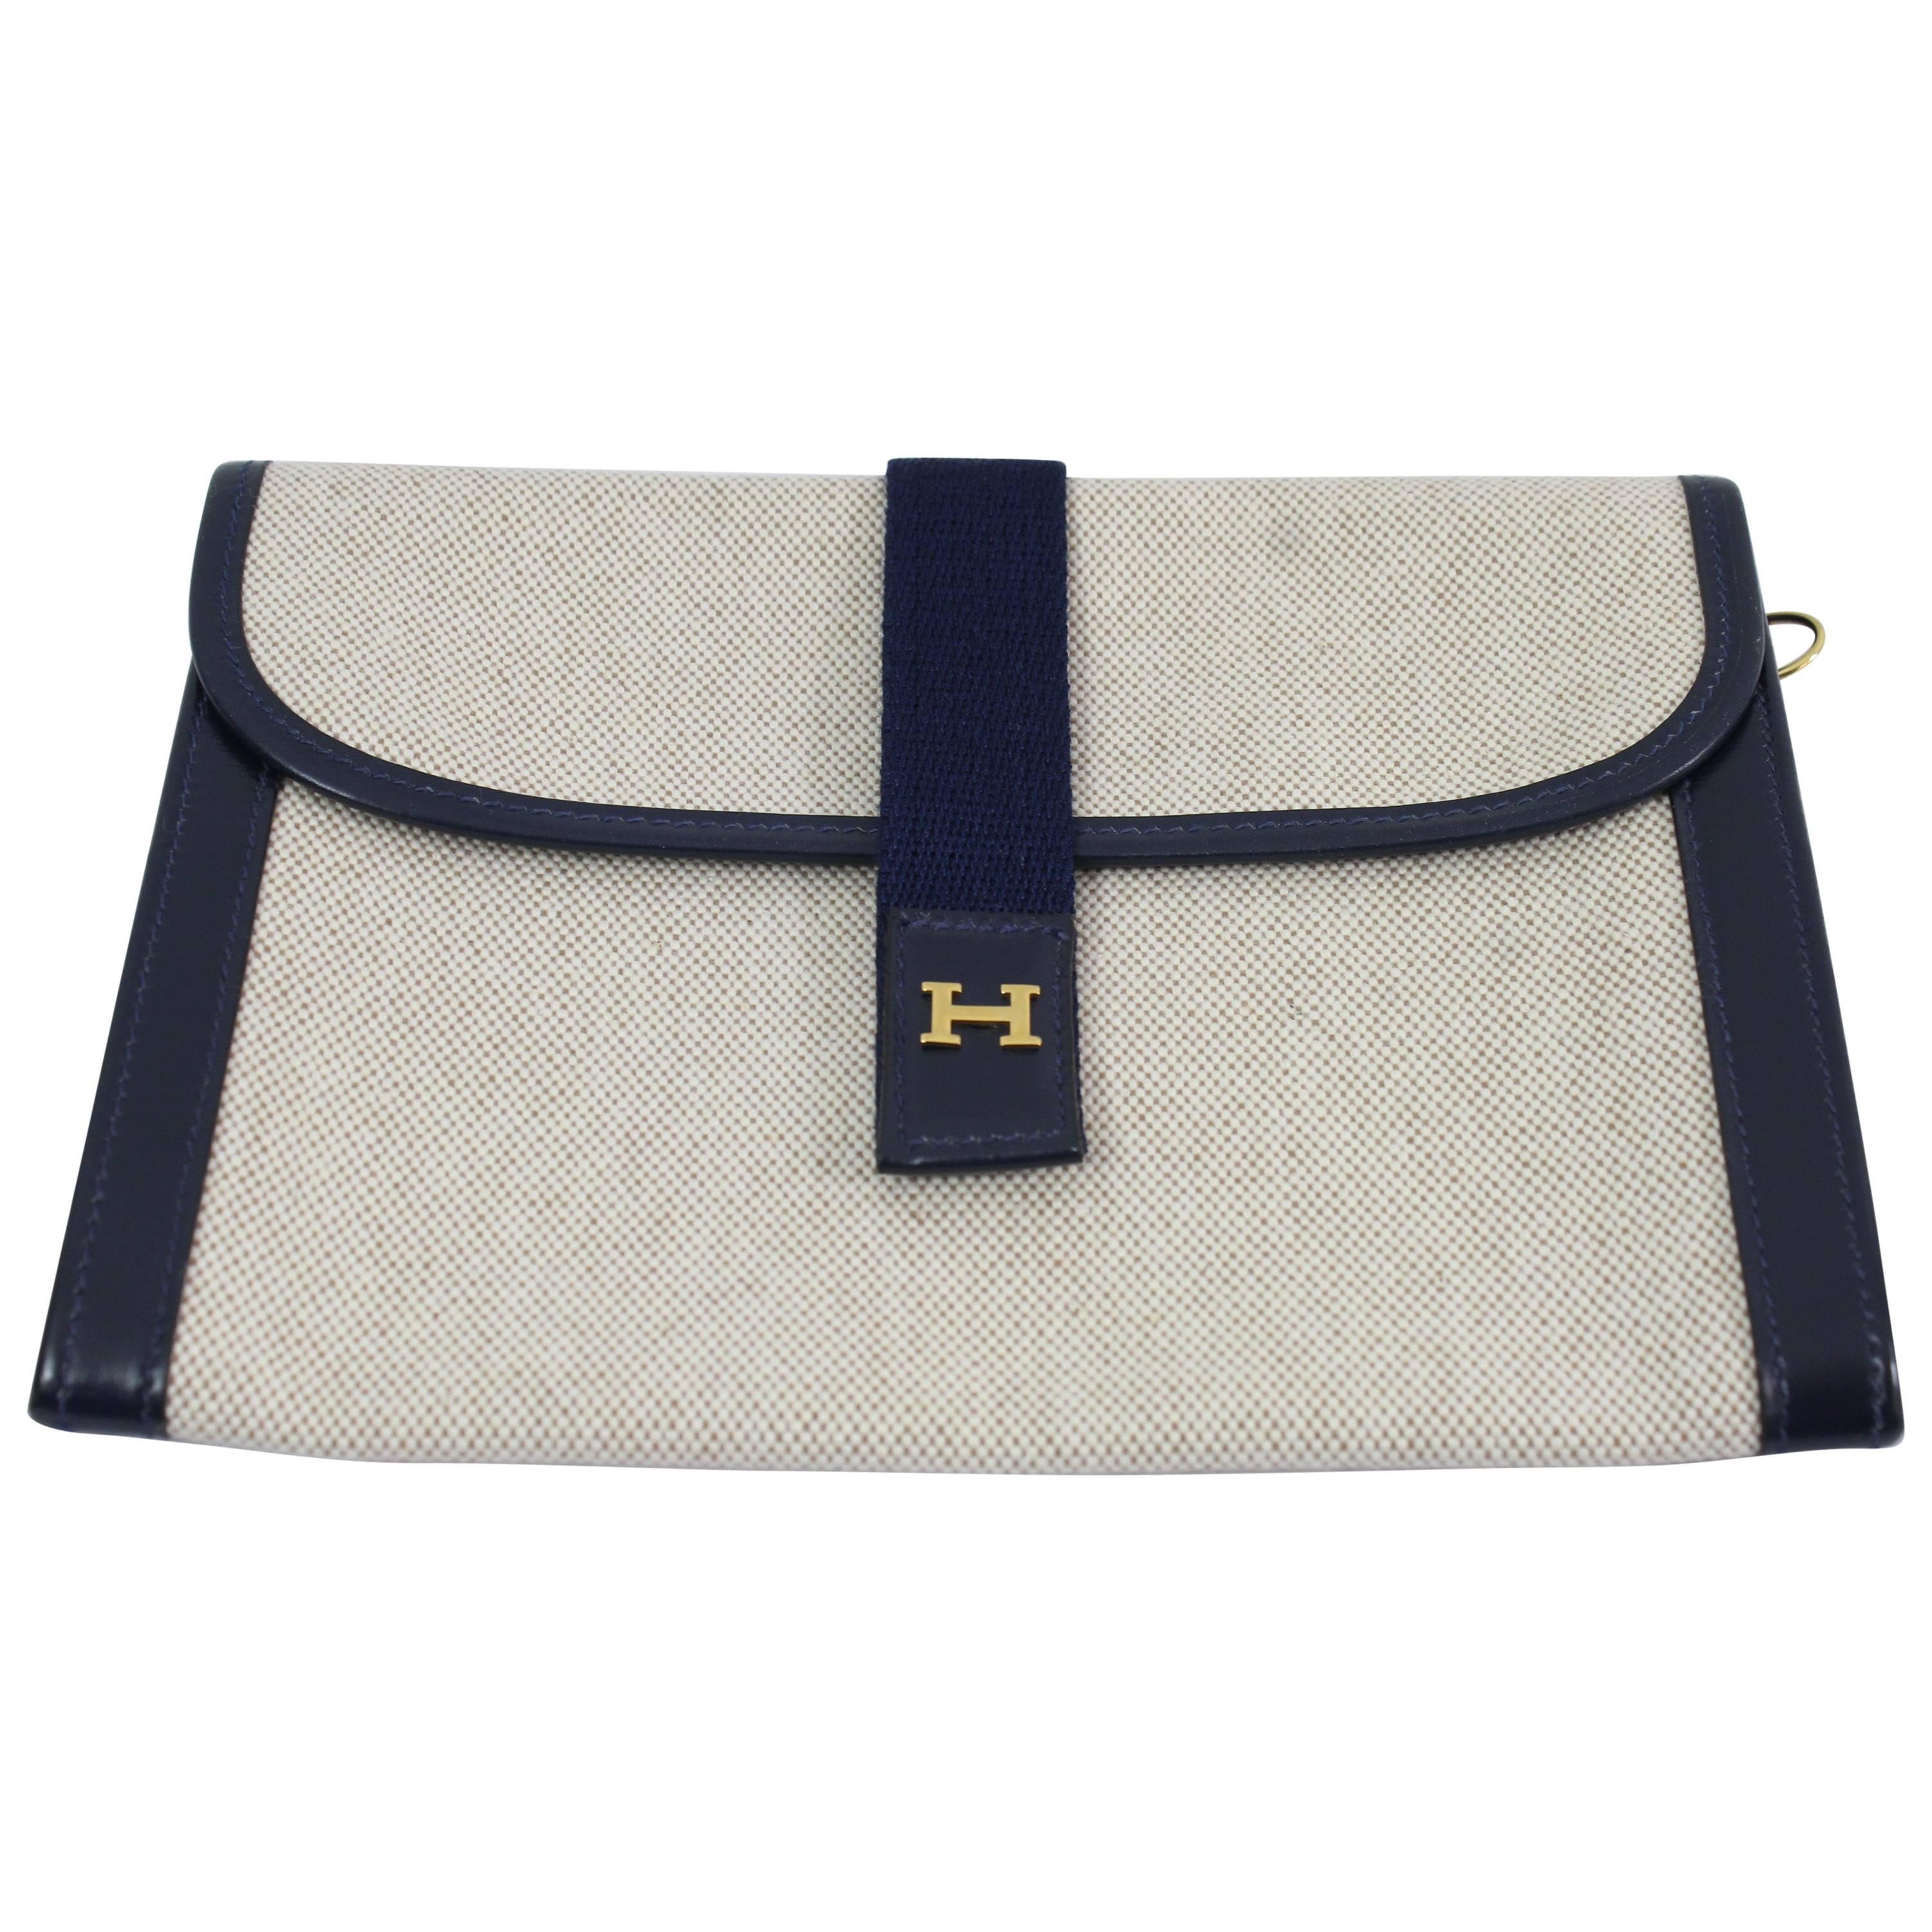 1984 Vintage Hermes  PM Clutch in Canvas and Leather.